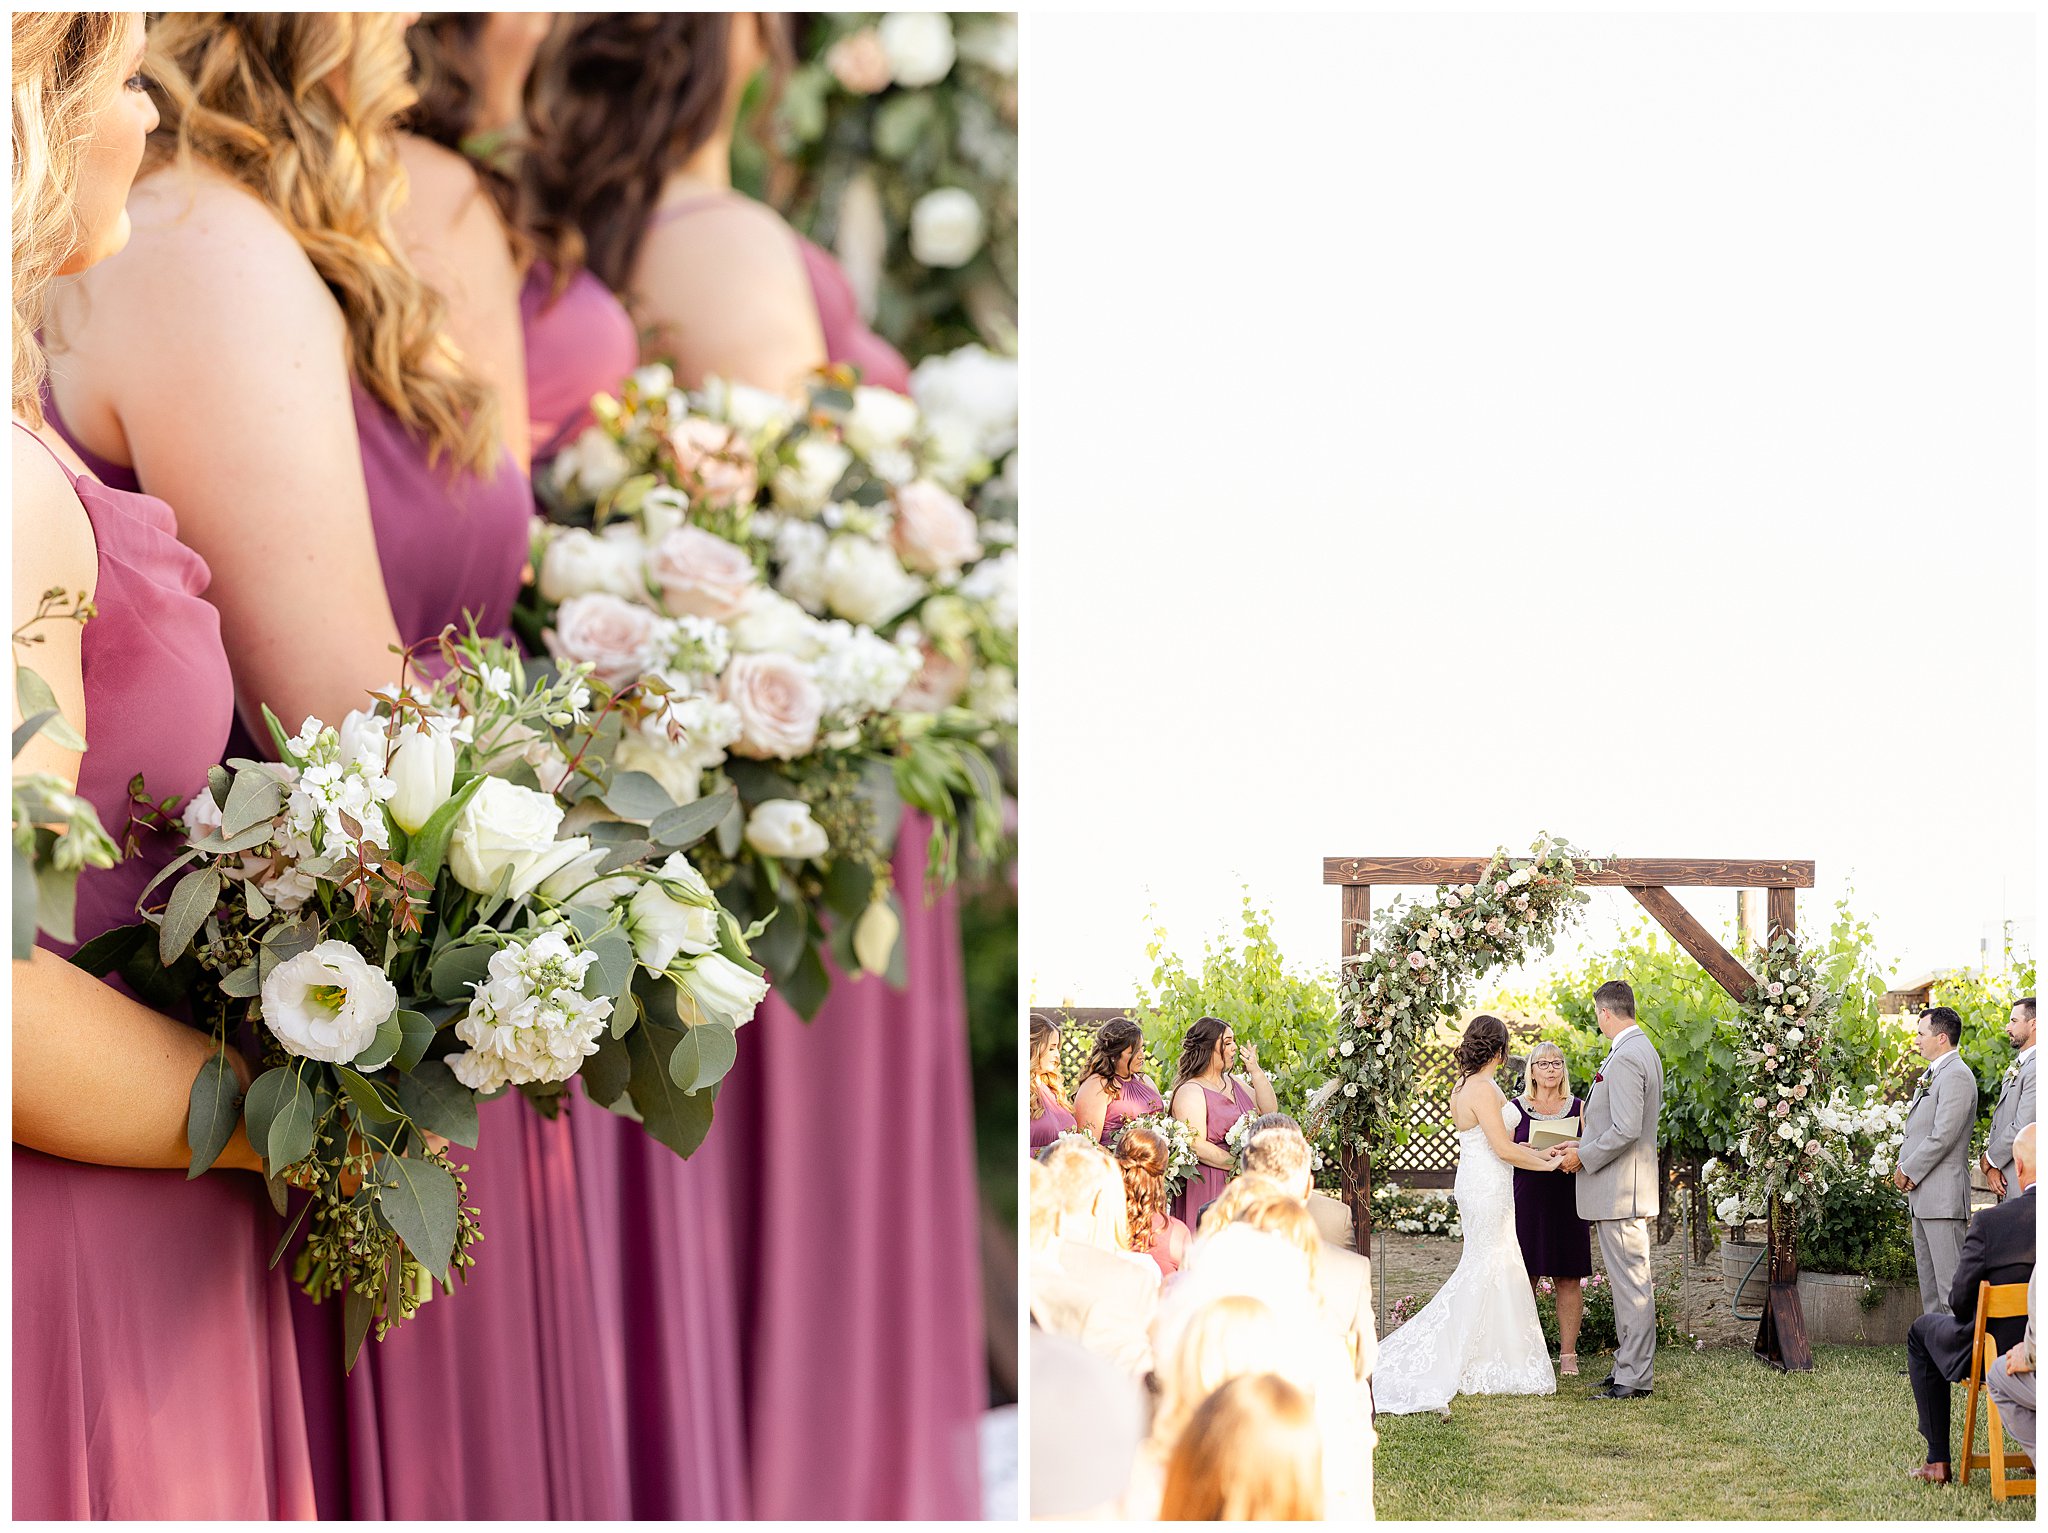 Scribner Bend Vineyard Wedding Sacramento CA Roses Arch Dusty Rose Grapevines Sunset Tent Garden Father Daughter First Look Gray Suits,